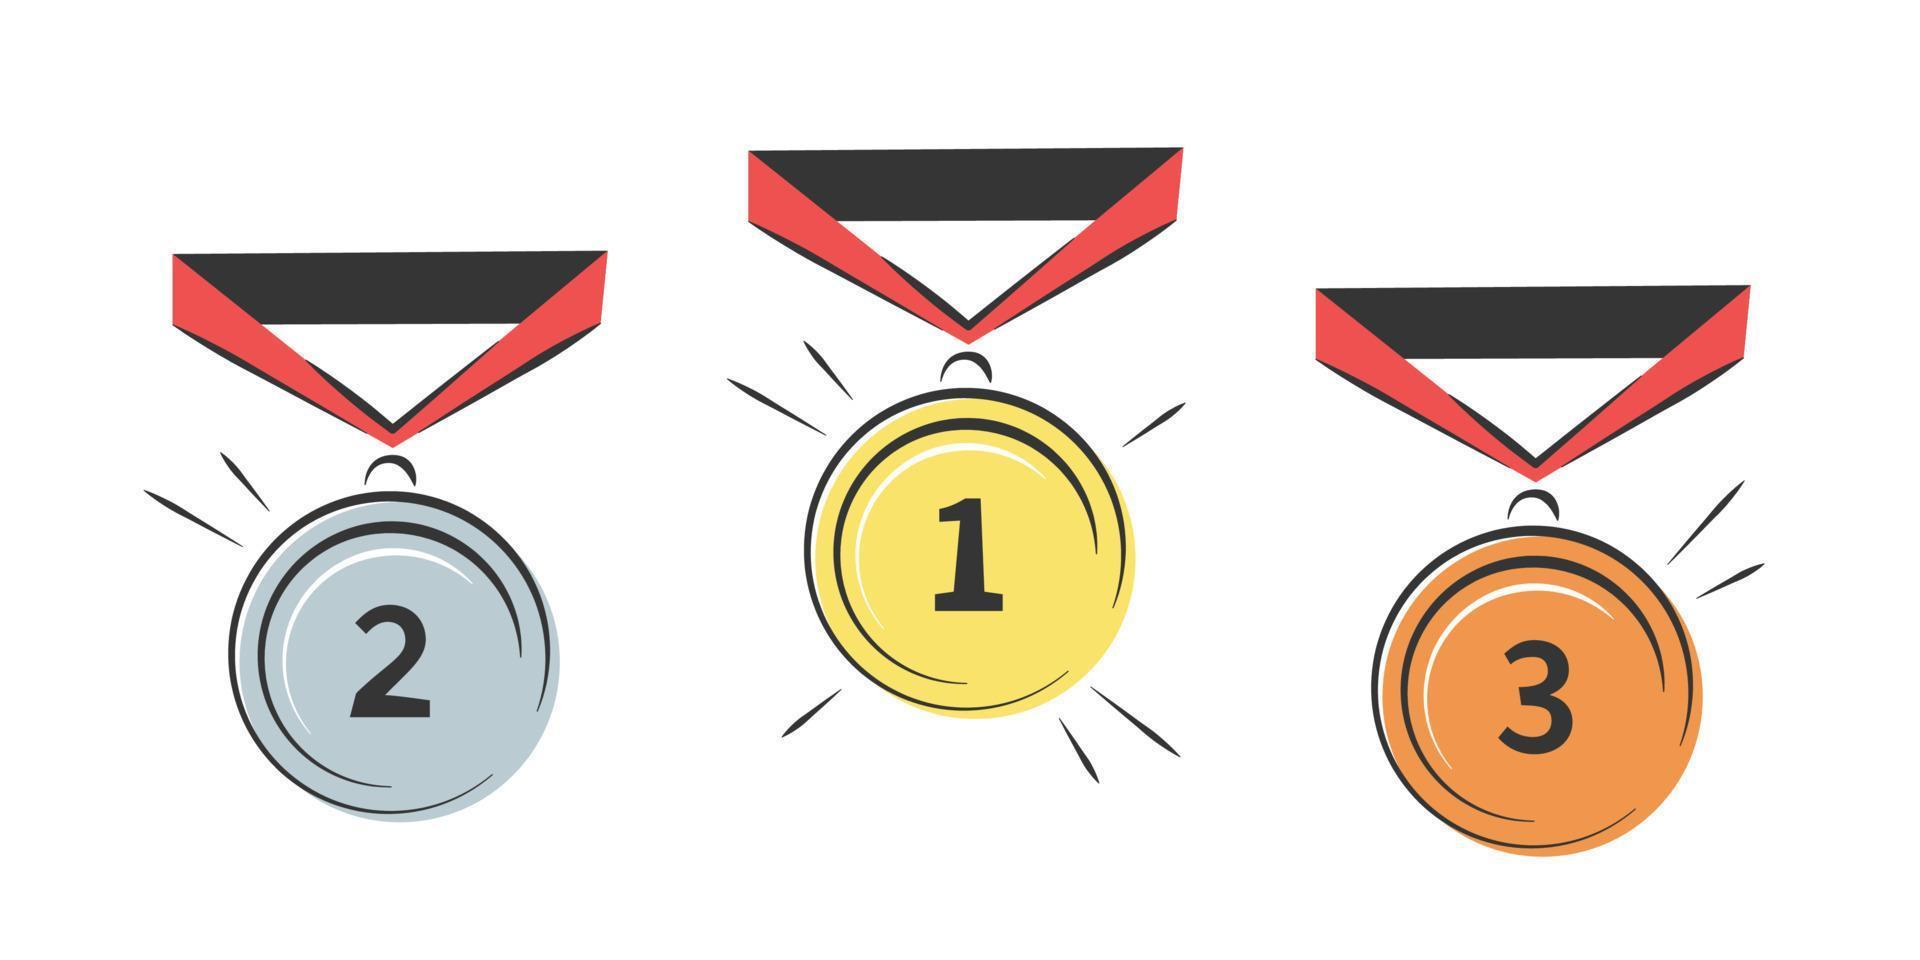 Gold, silver and bronze medals. Champion and winner awards medal set. Vector illustrations isolated on white background.